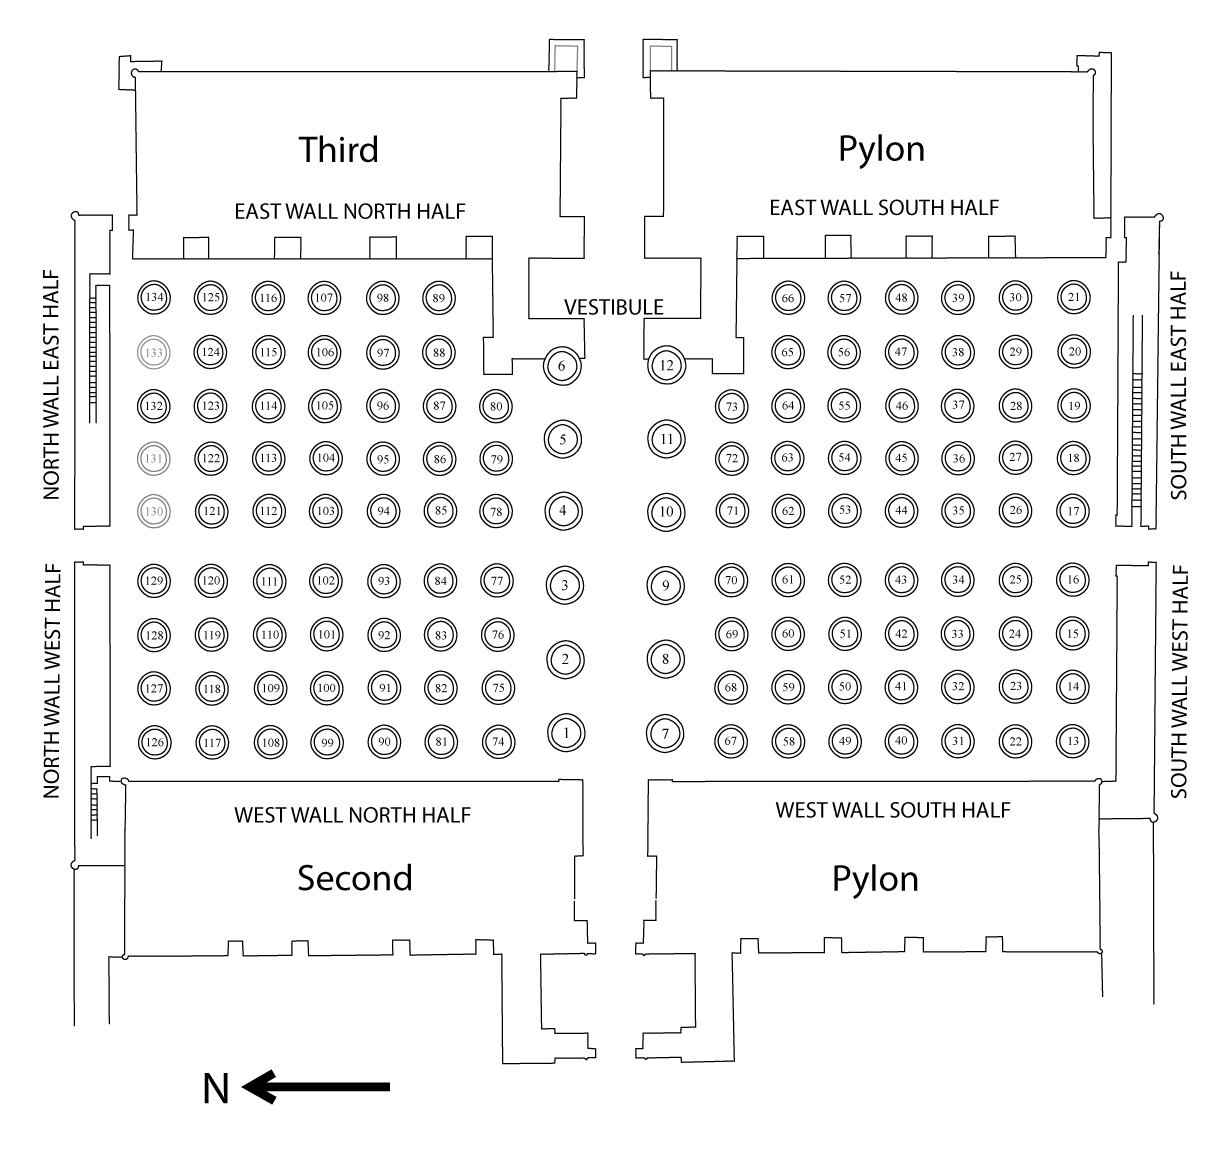 Plan of the Hypostyle Hall